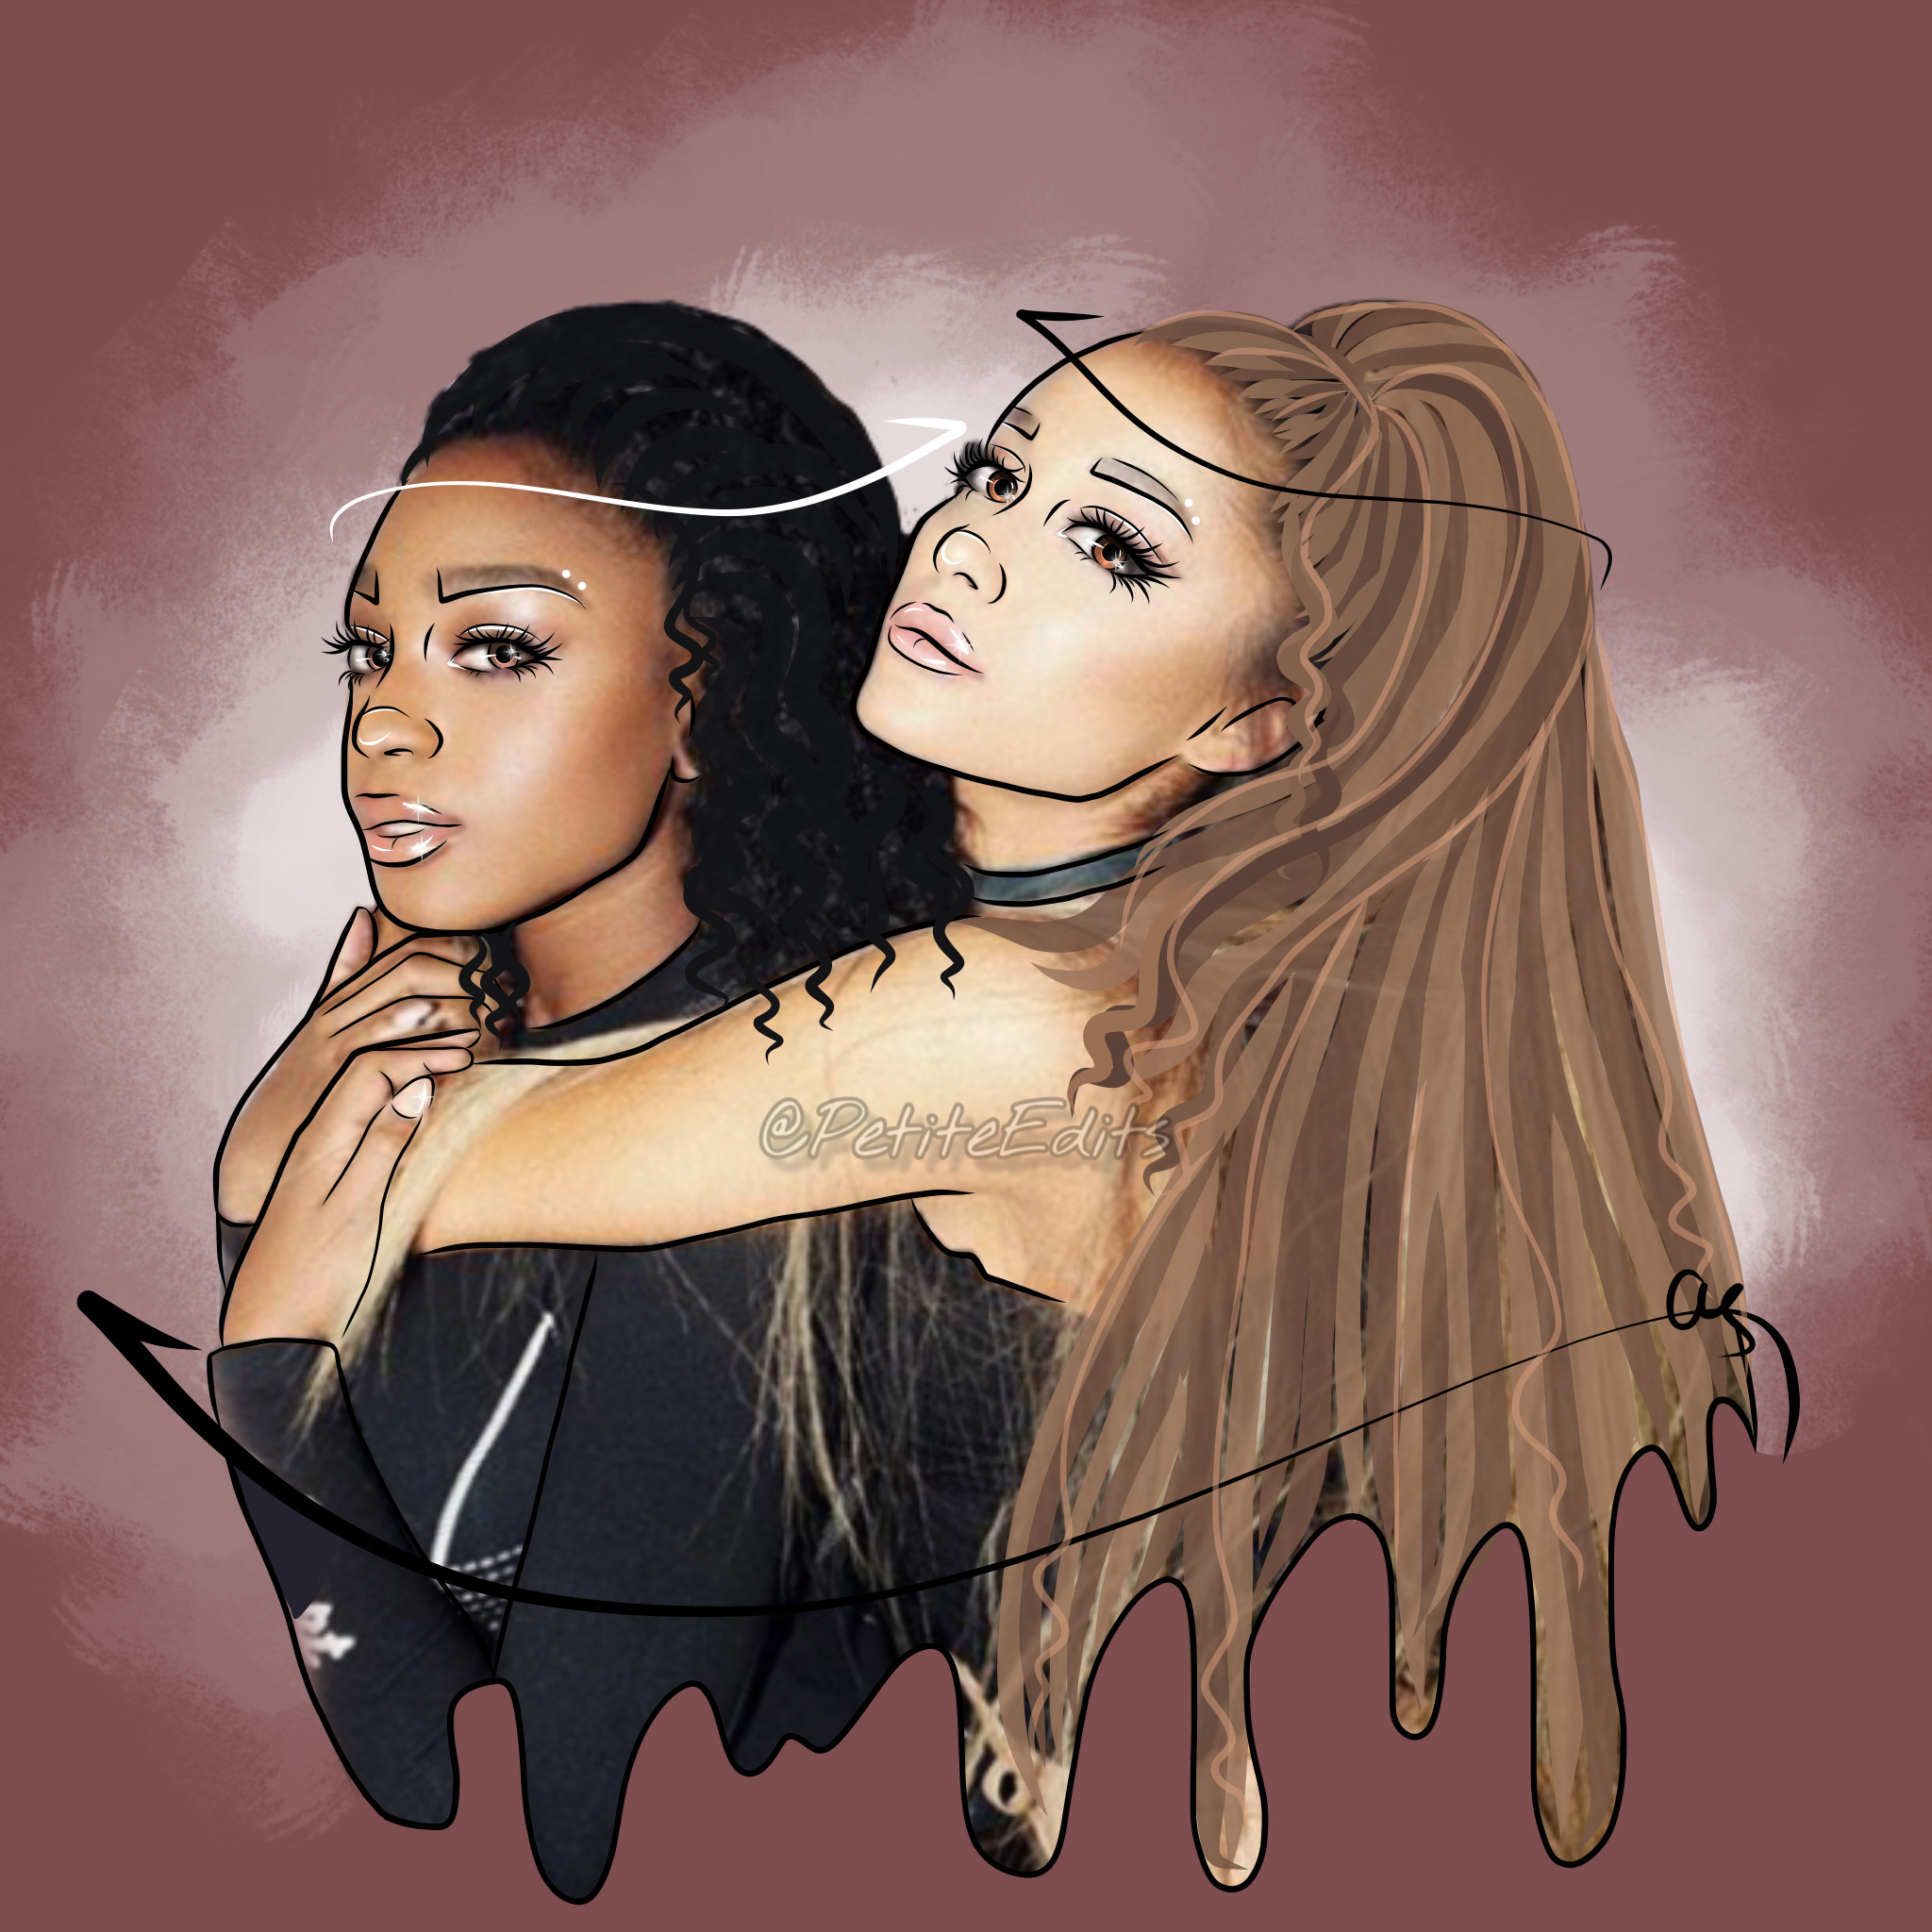 is about outline outlines arianagrande normani arianagrandeoutline freetoed...